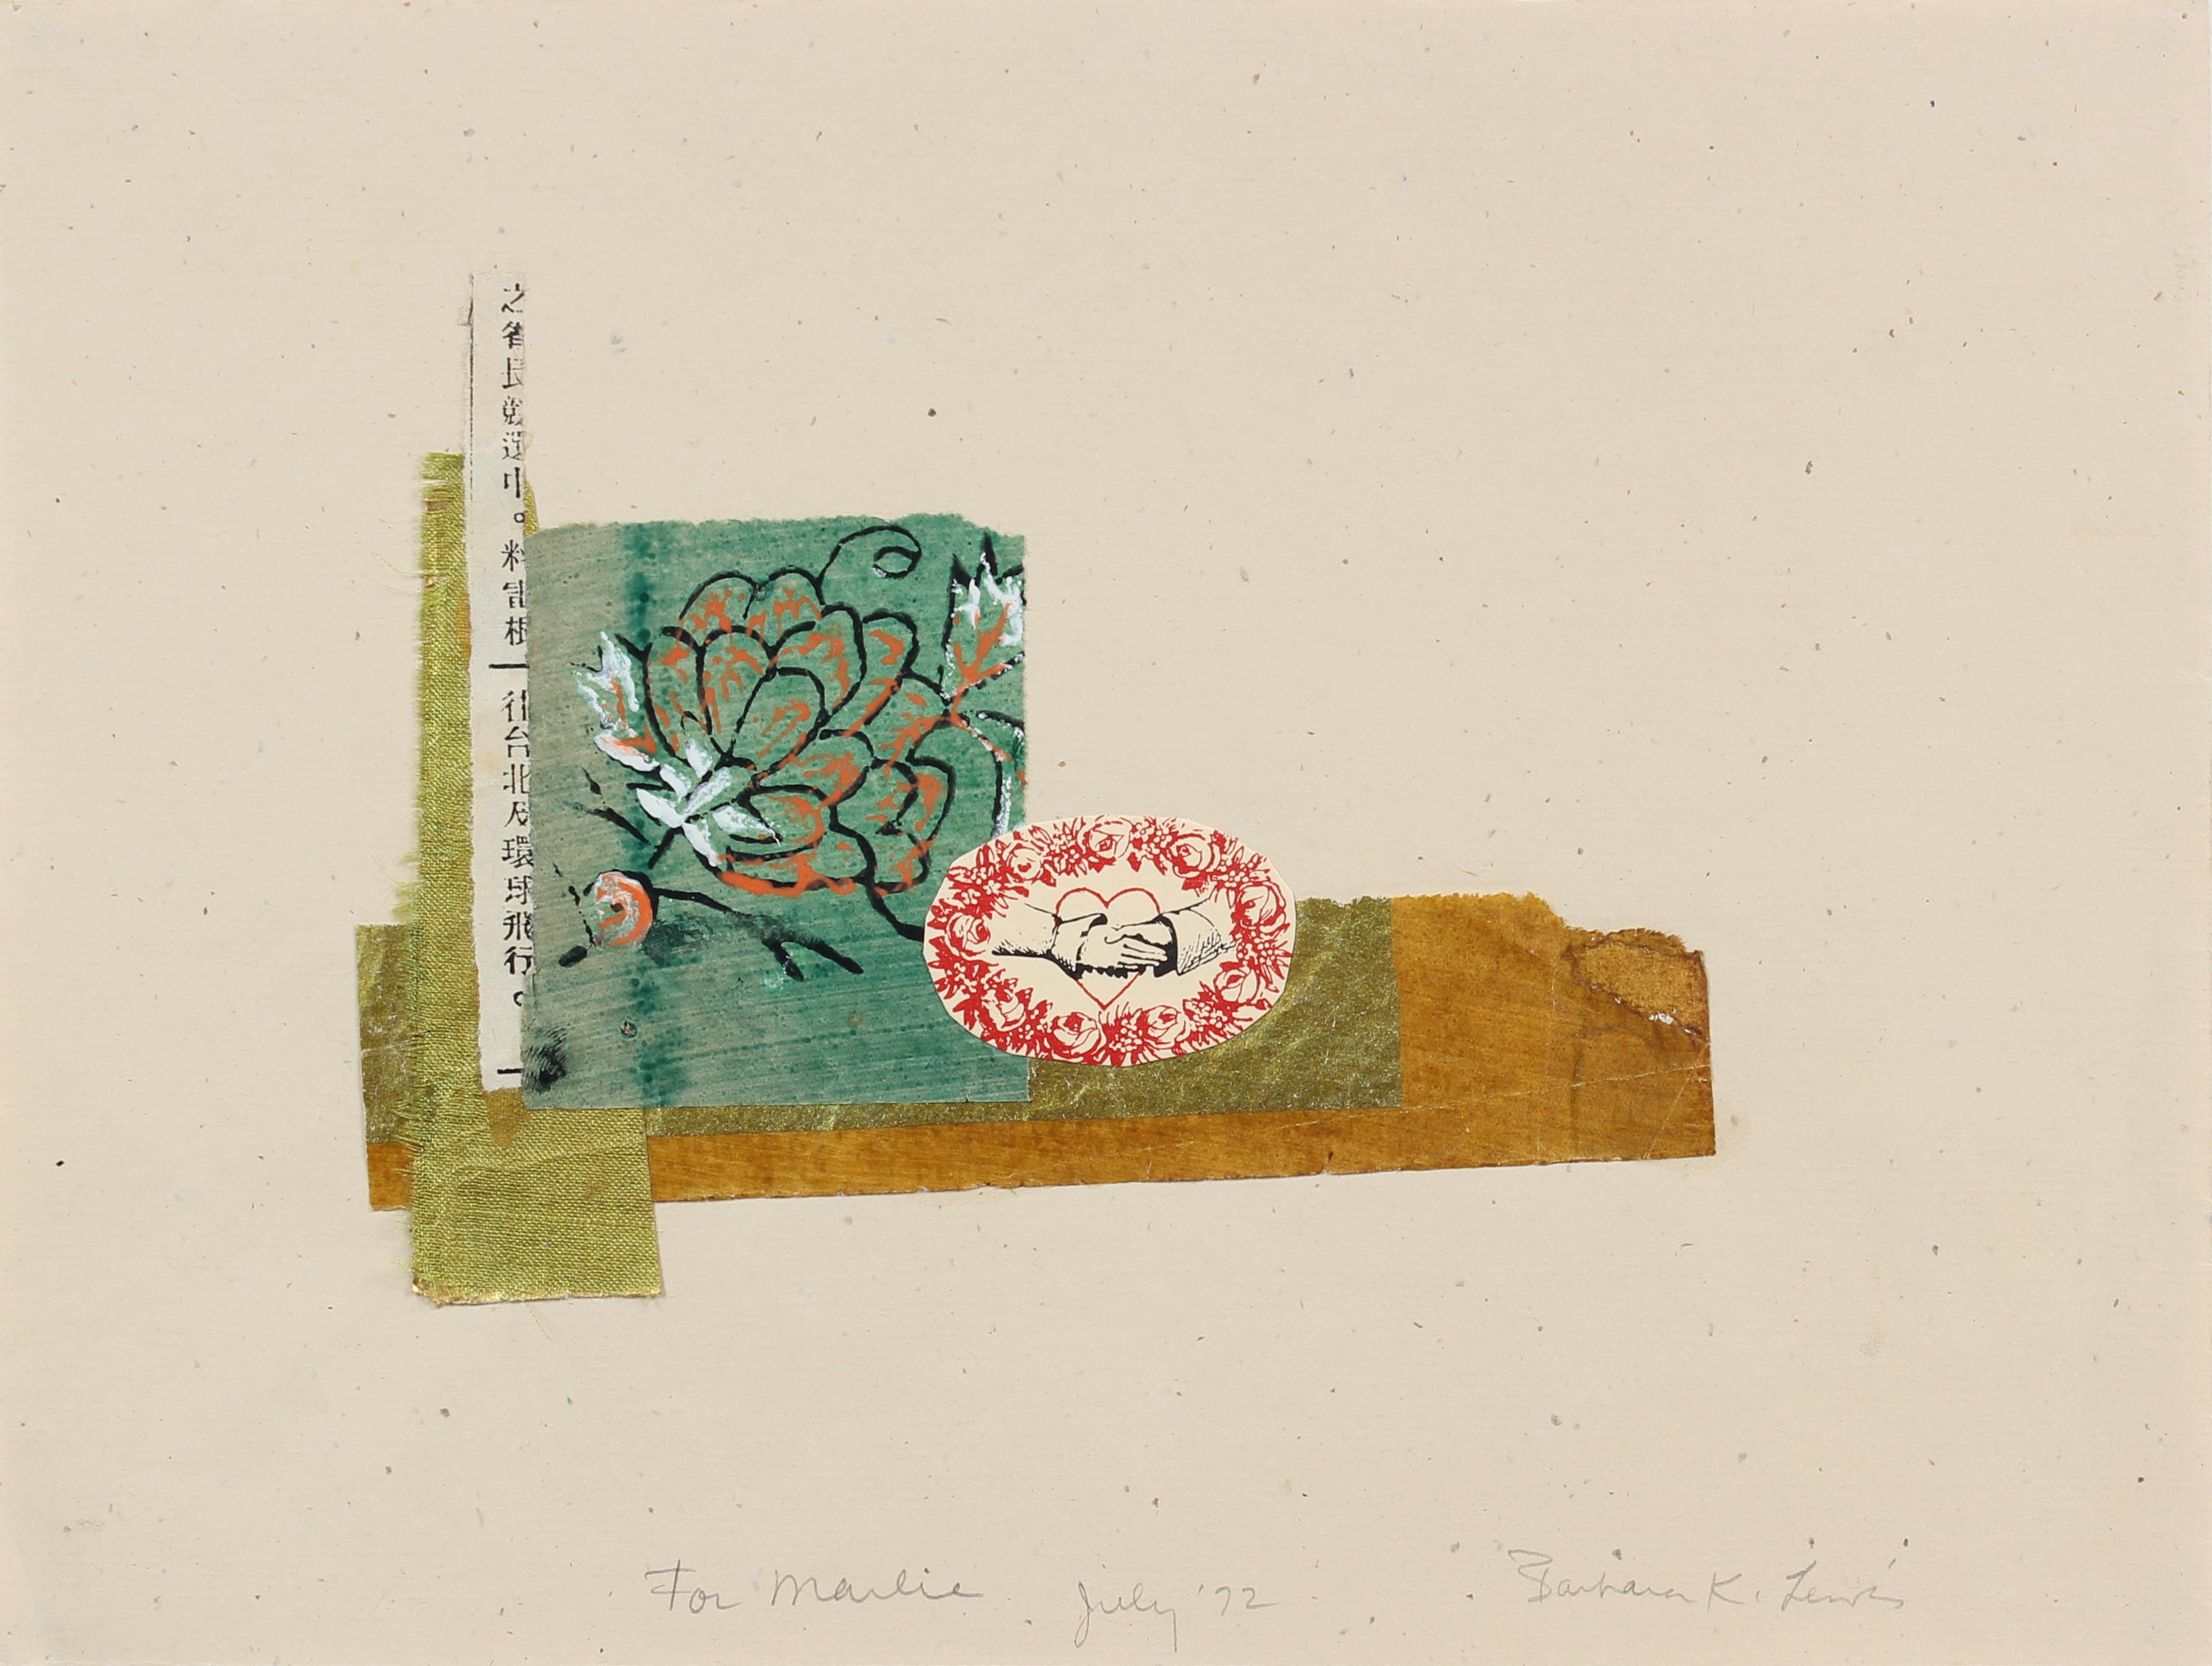 Romantic Mixed Media Collage with Turquoise Flower & Red Heart, July 1972 - Post-Modern Mixed Media Art by Barbara Lewis